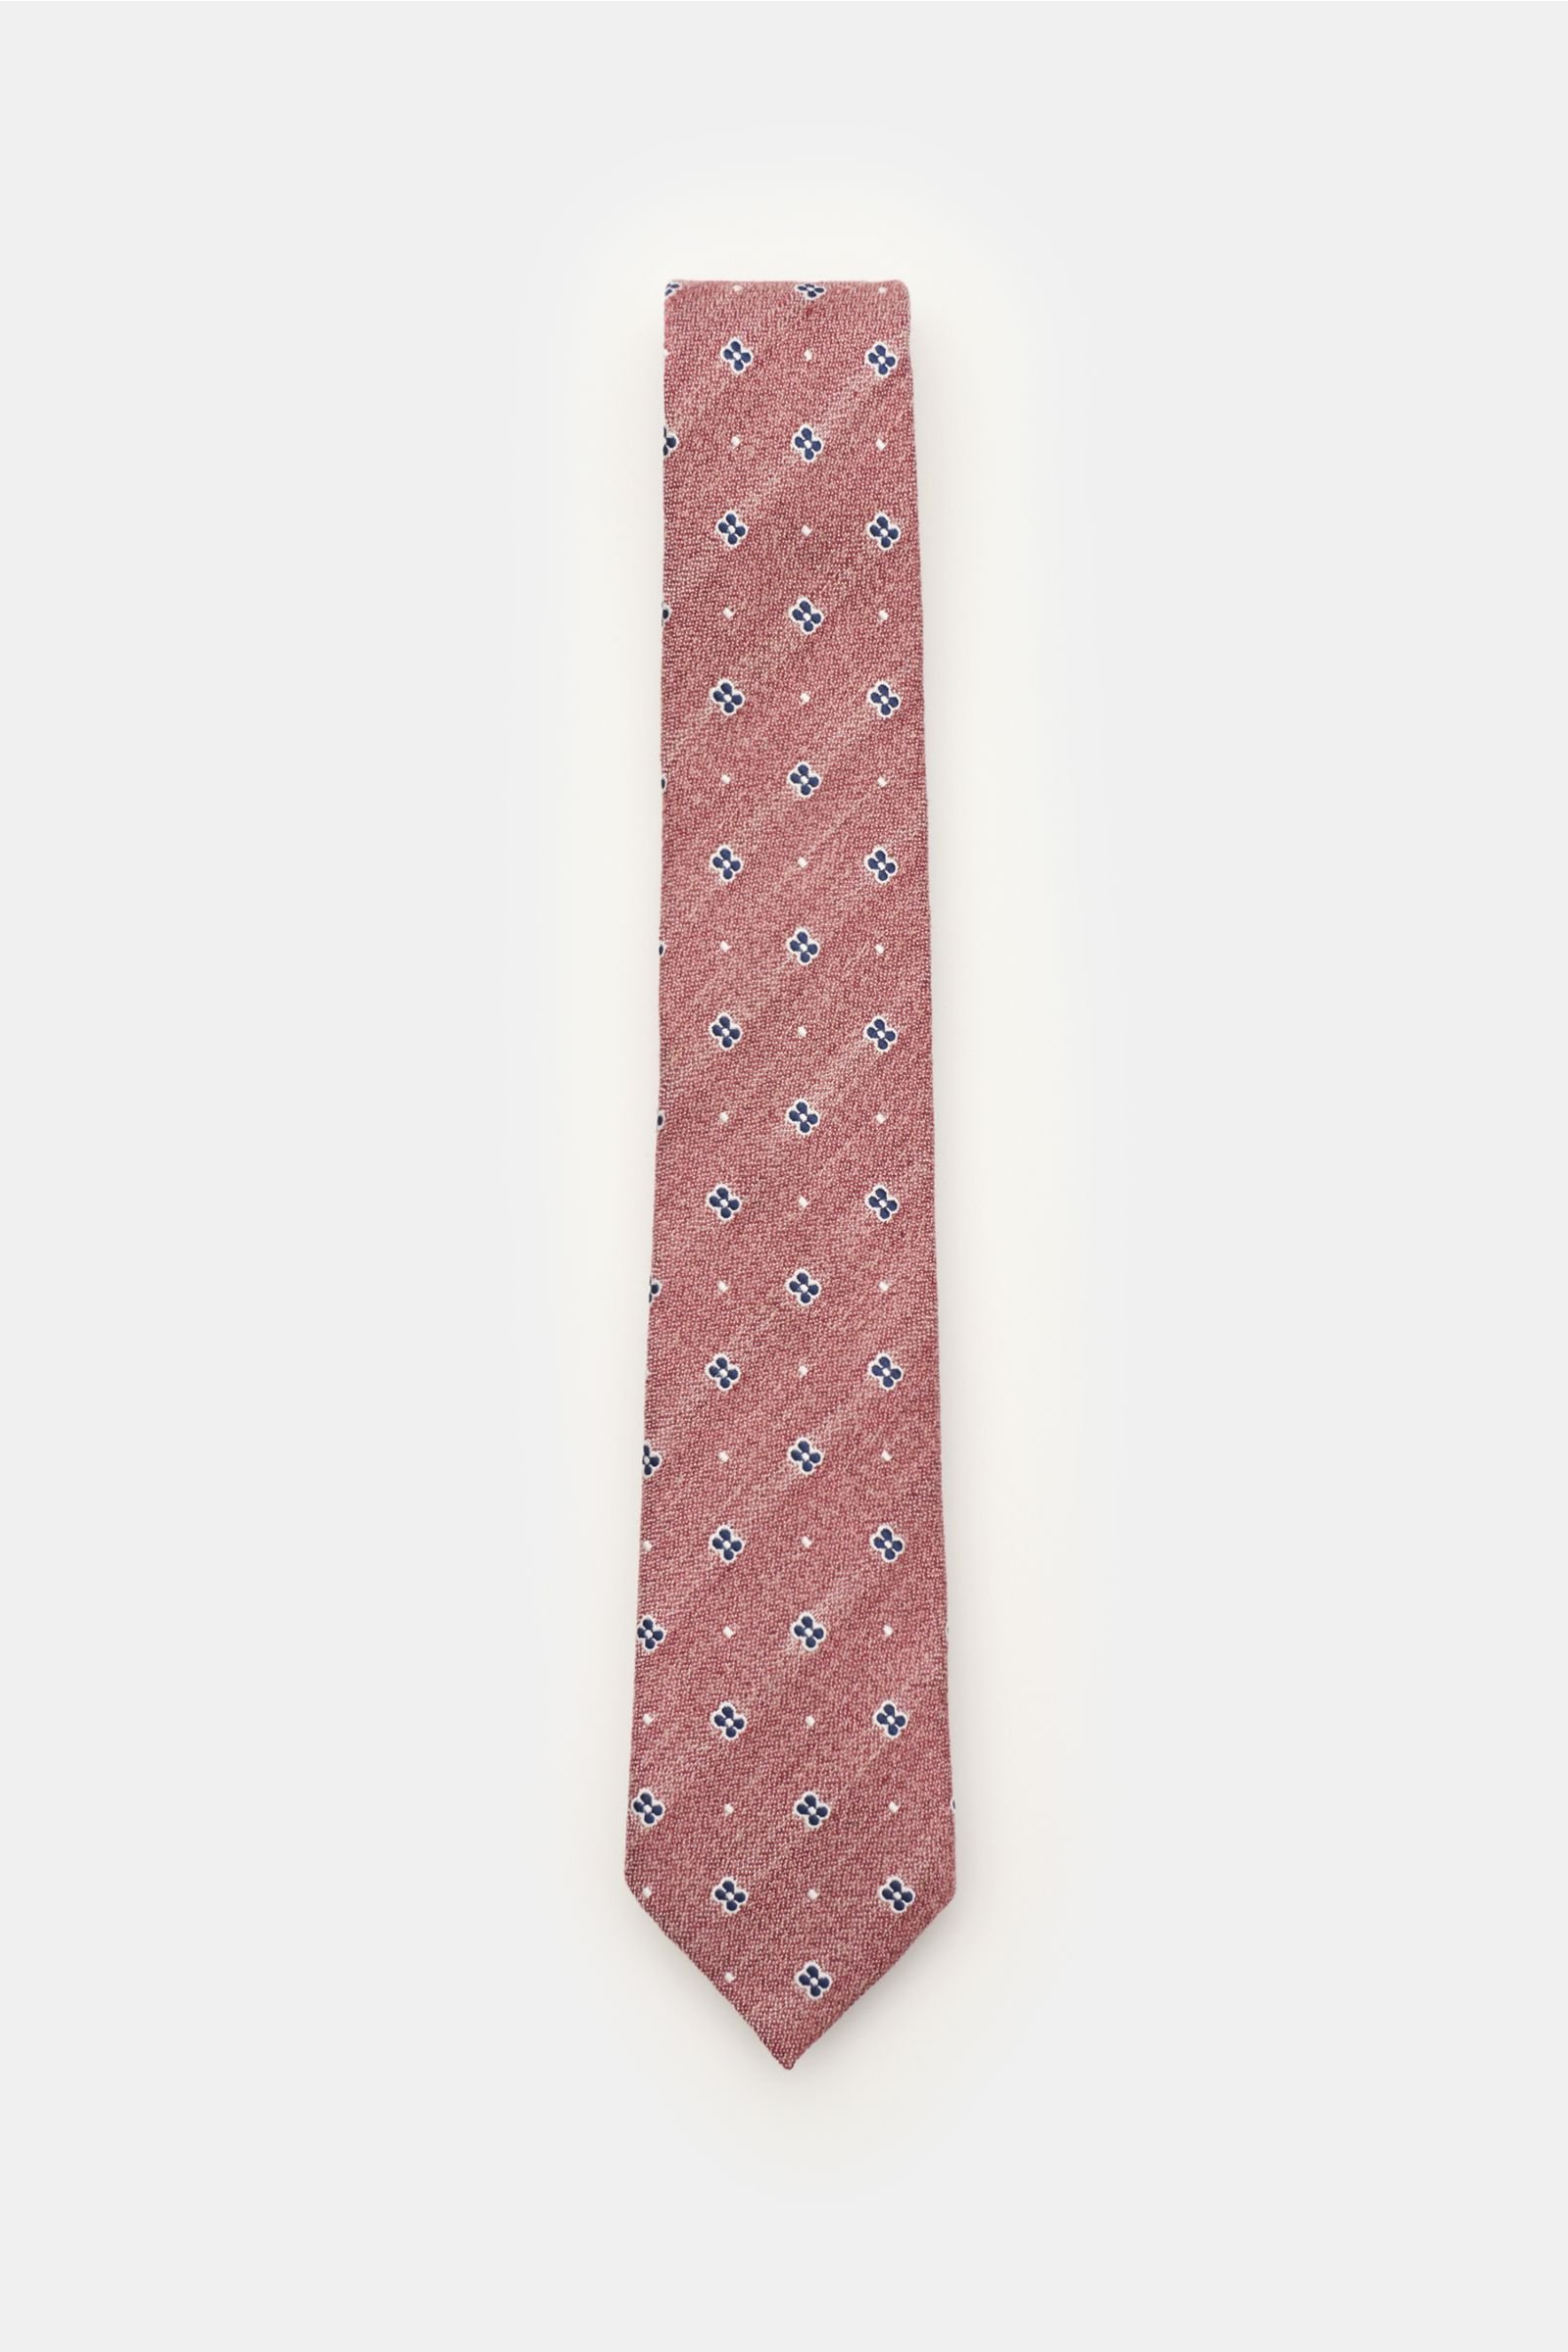 Tie antique pink/navy patterned